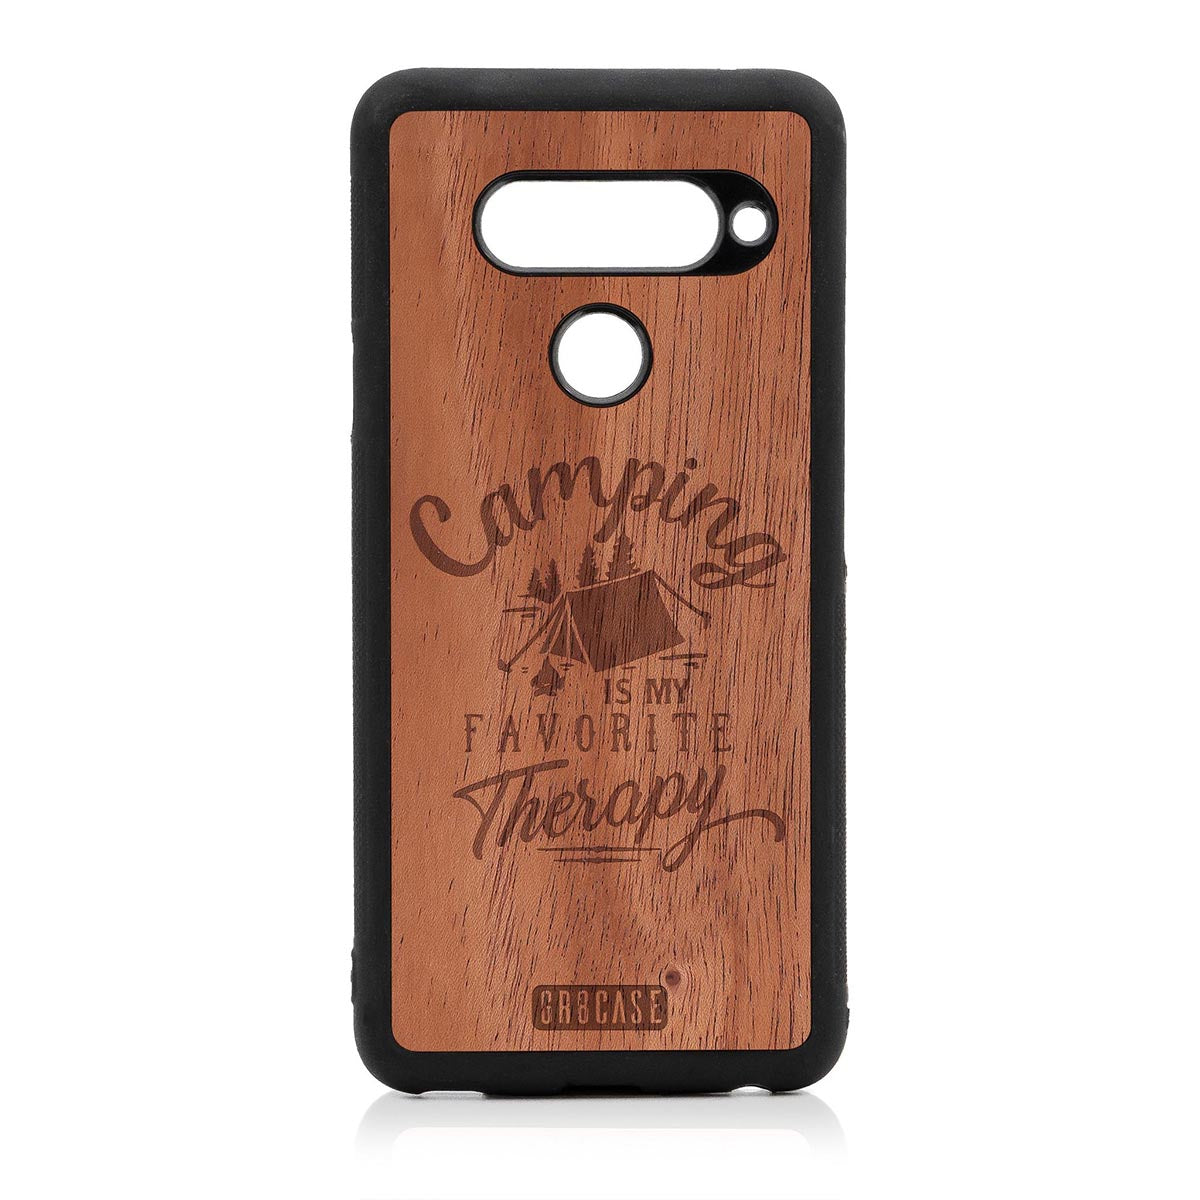 Camping Is My Favorite Therapy Design Wood Case For LG V40 ThinQ by GR8CASE